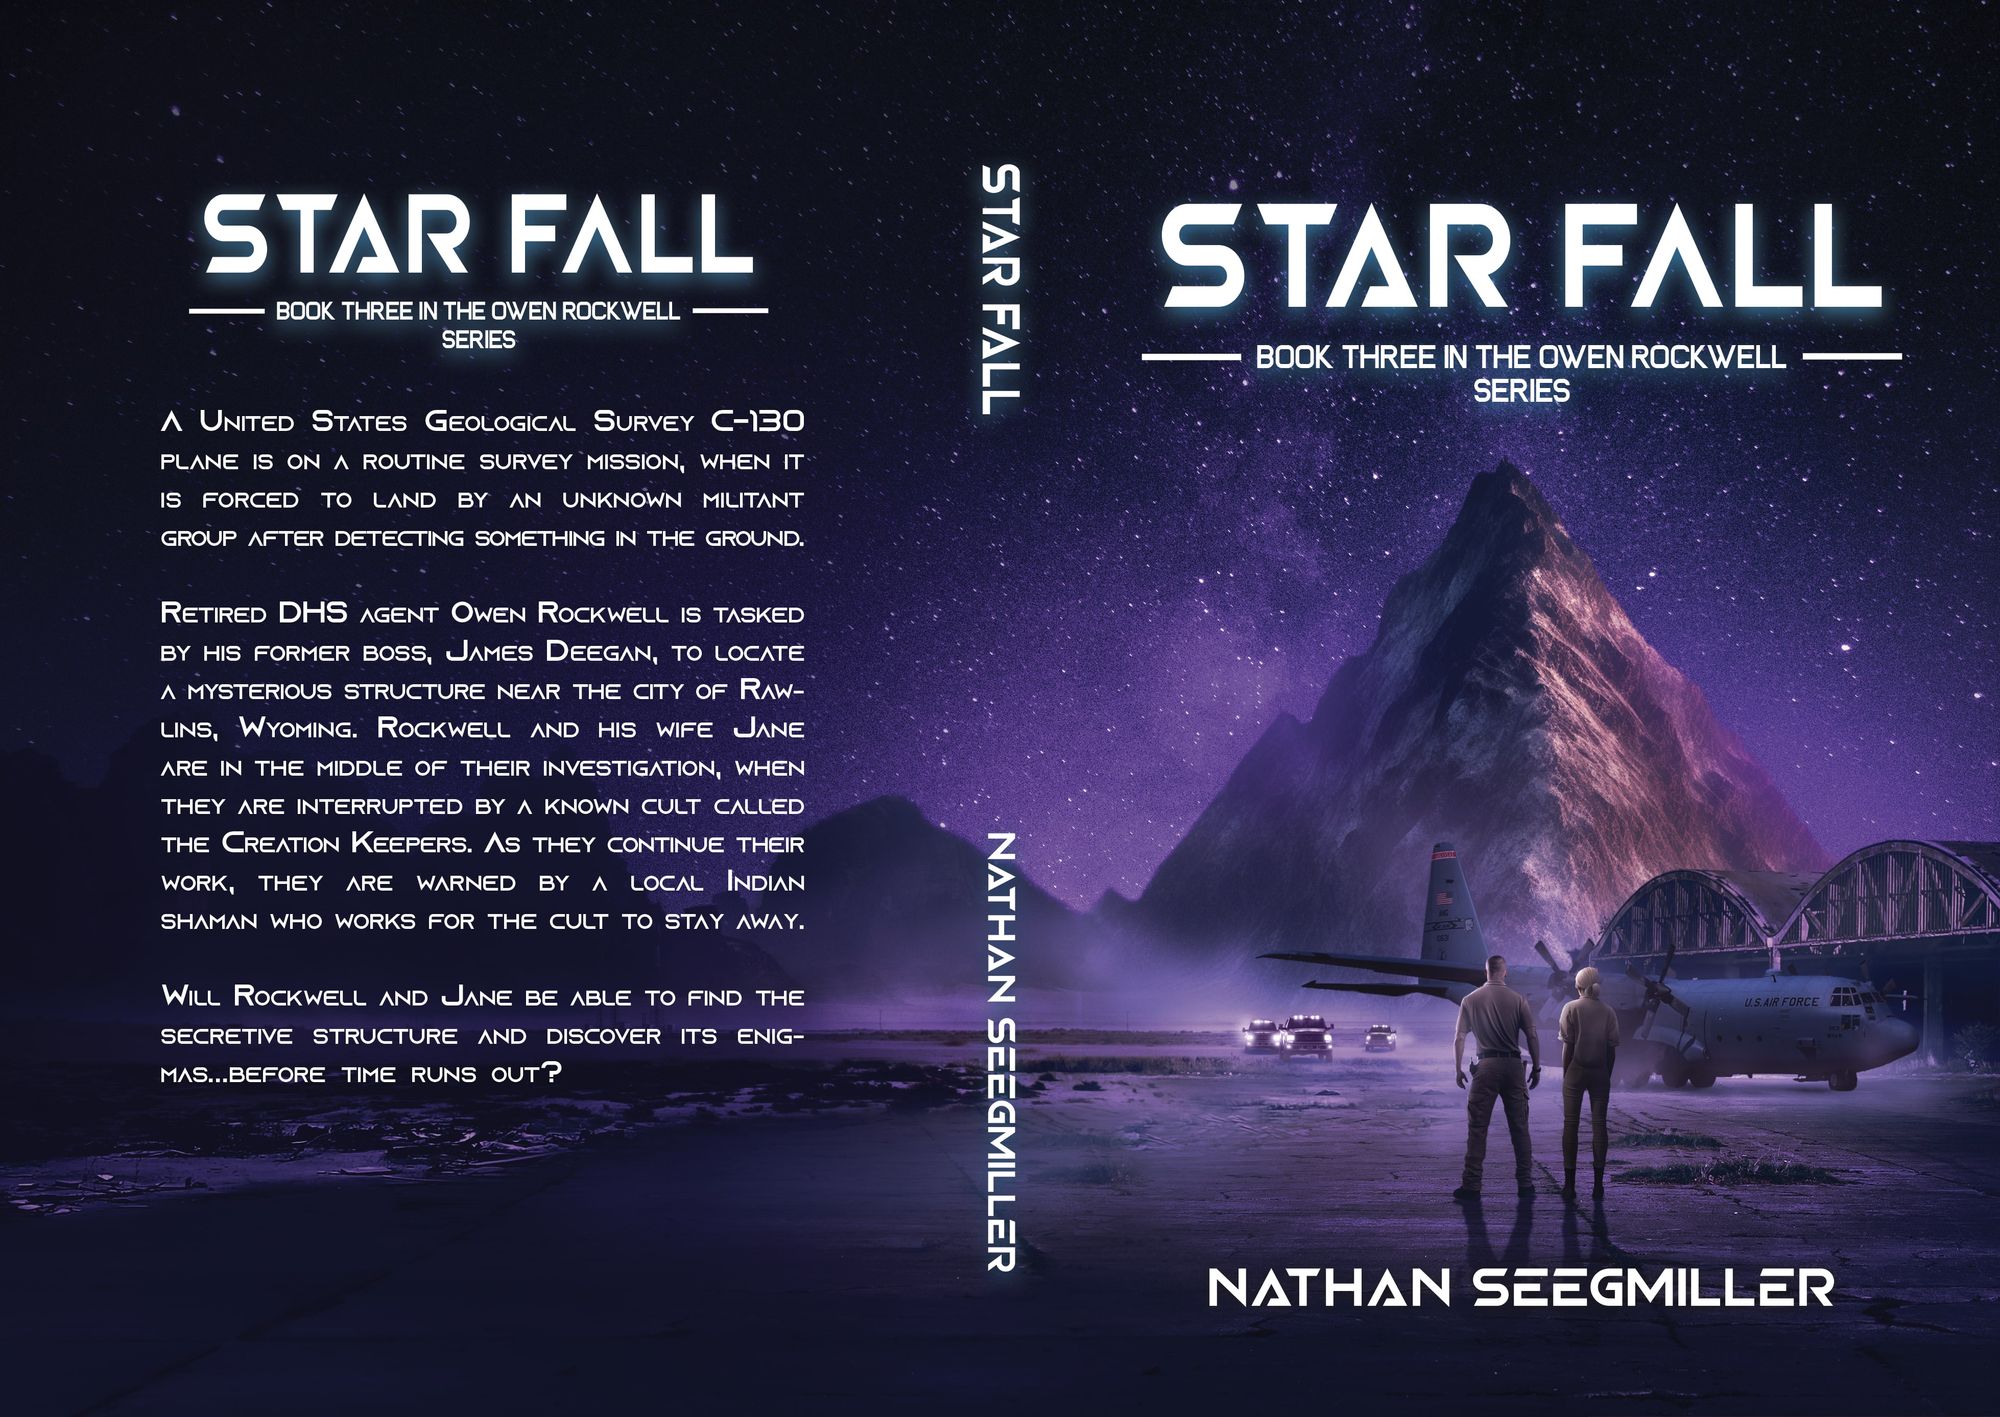 Star Fall by Nathan Seegmiller